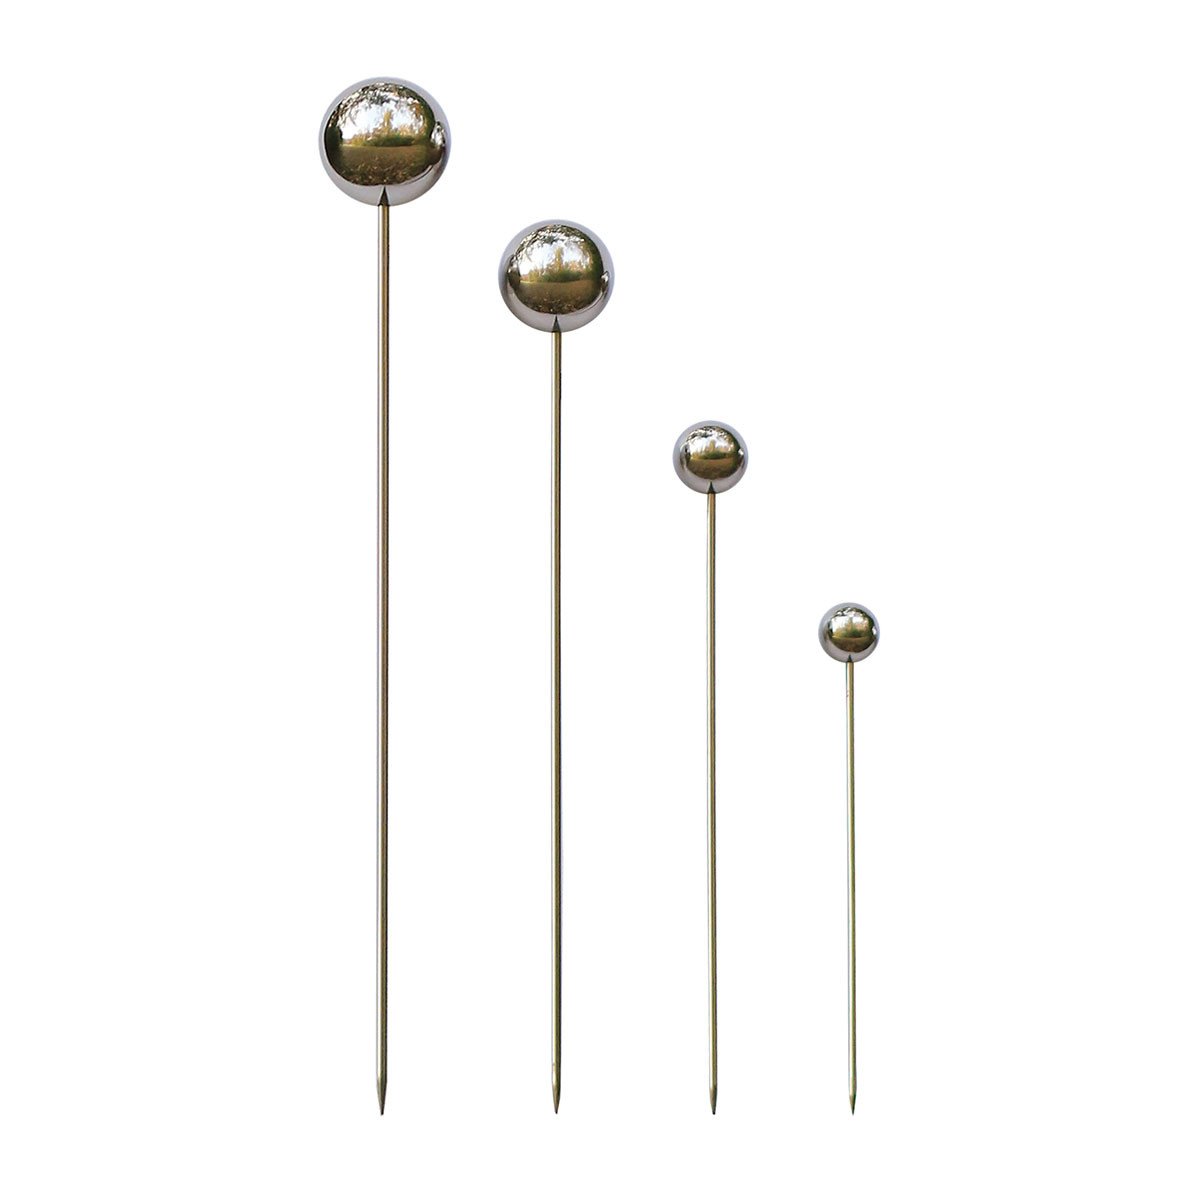 Small Stainless Steel Garden Lollipop Stakes, Rome #715